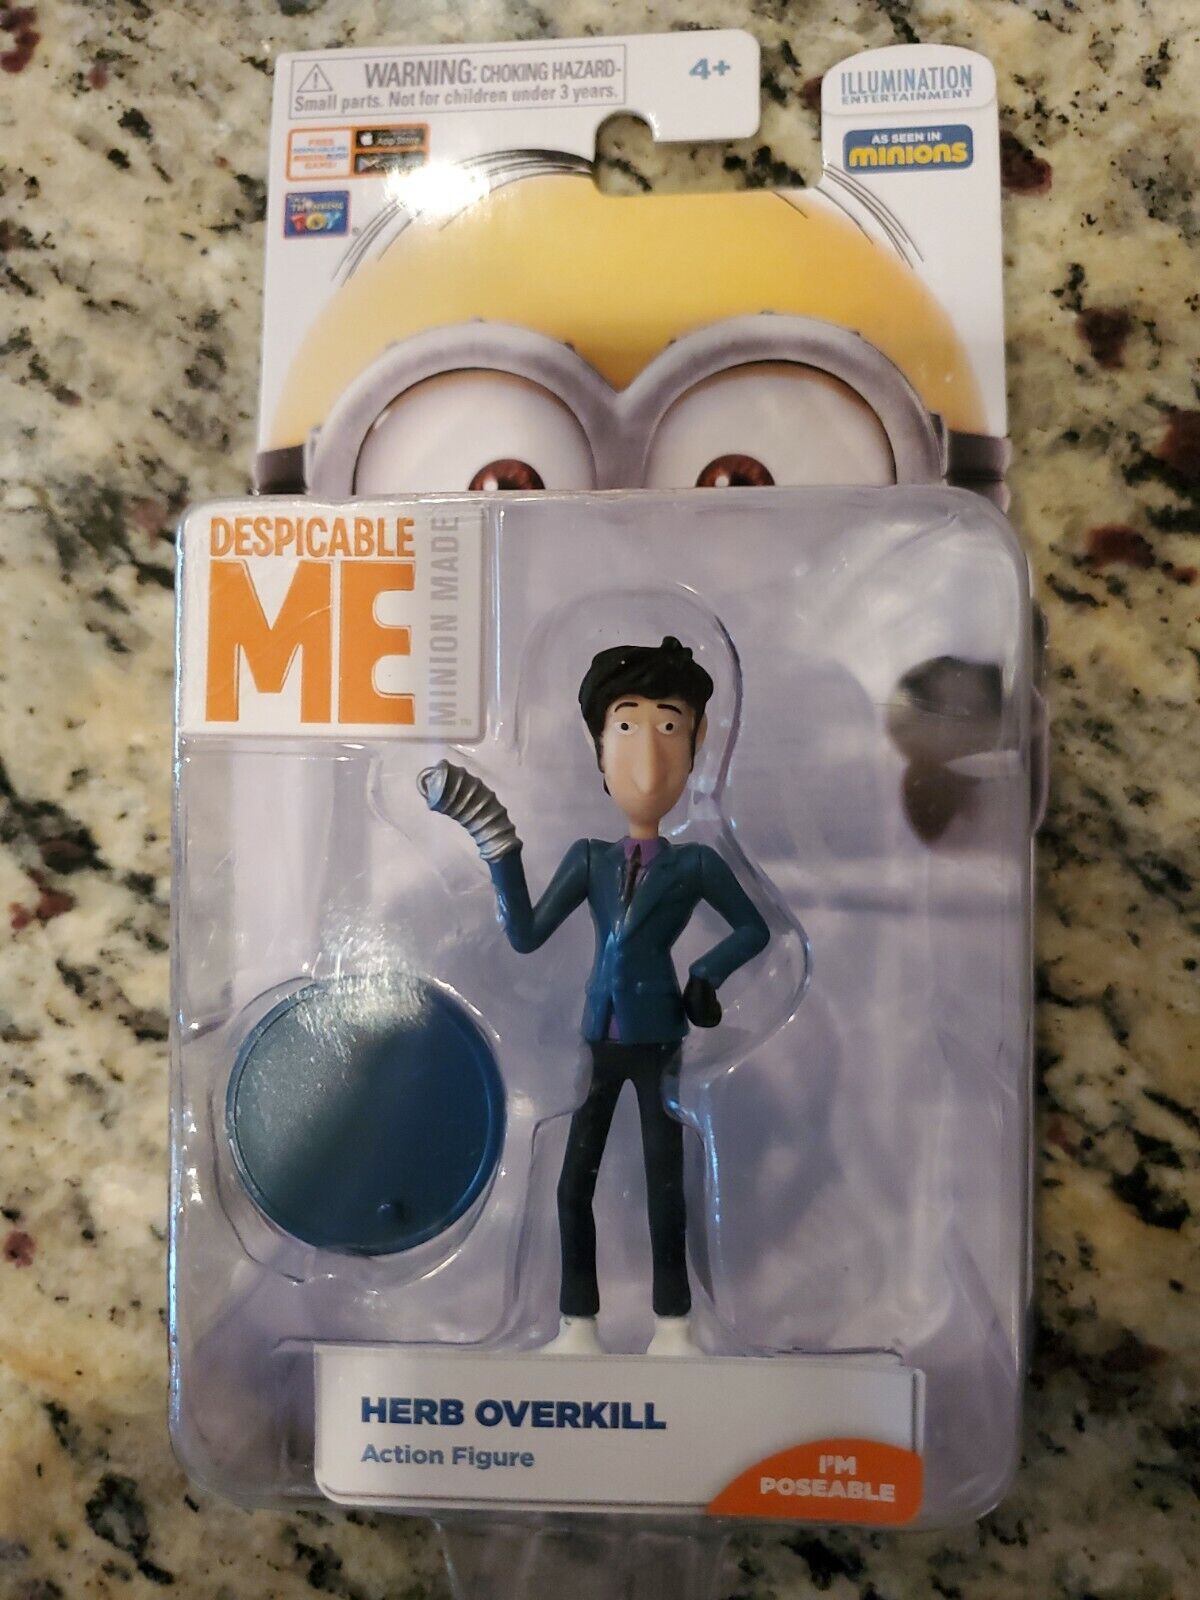 Despicable Me Minions Movie 3" Poseable Action Figure HERB OVERKILL NEW FREE S/H